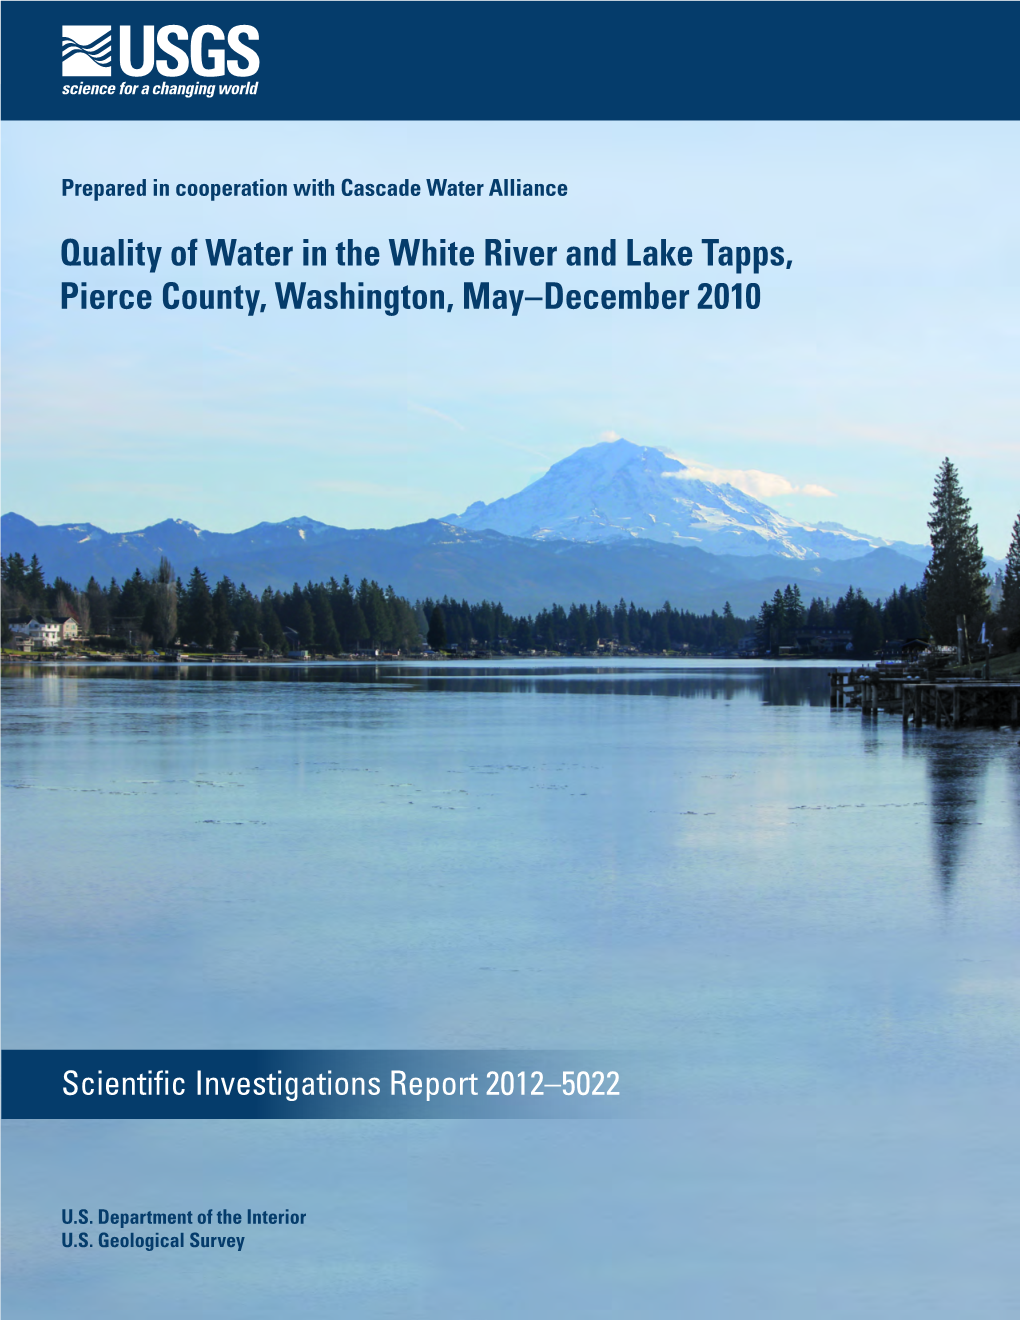 Quality of Water in the White River and Lake Tapps, Pierce County, Washington, May–December 2010